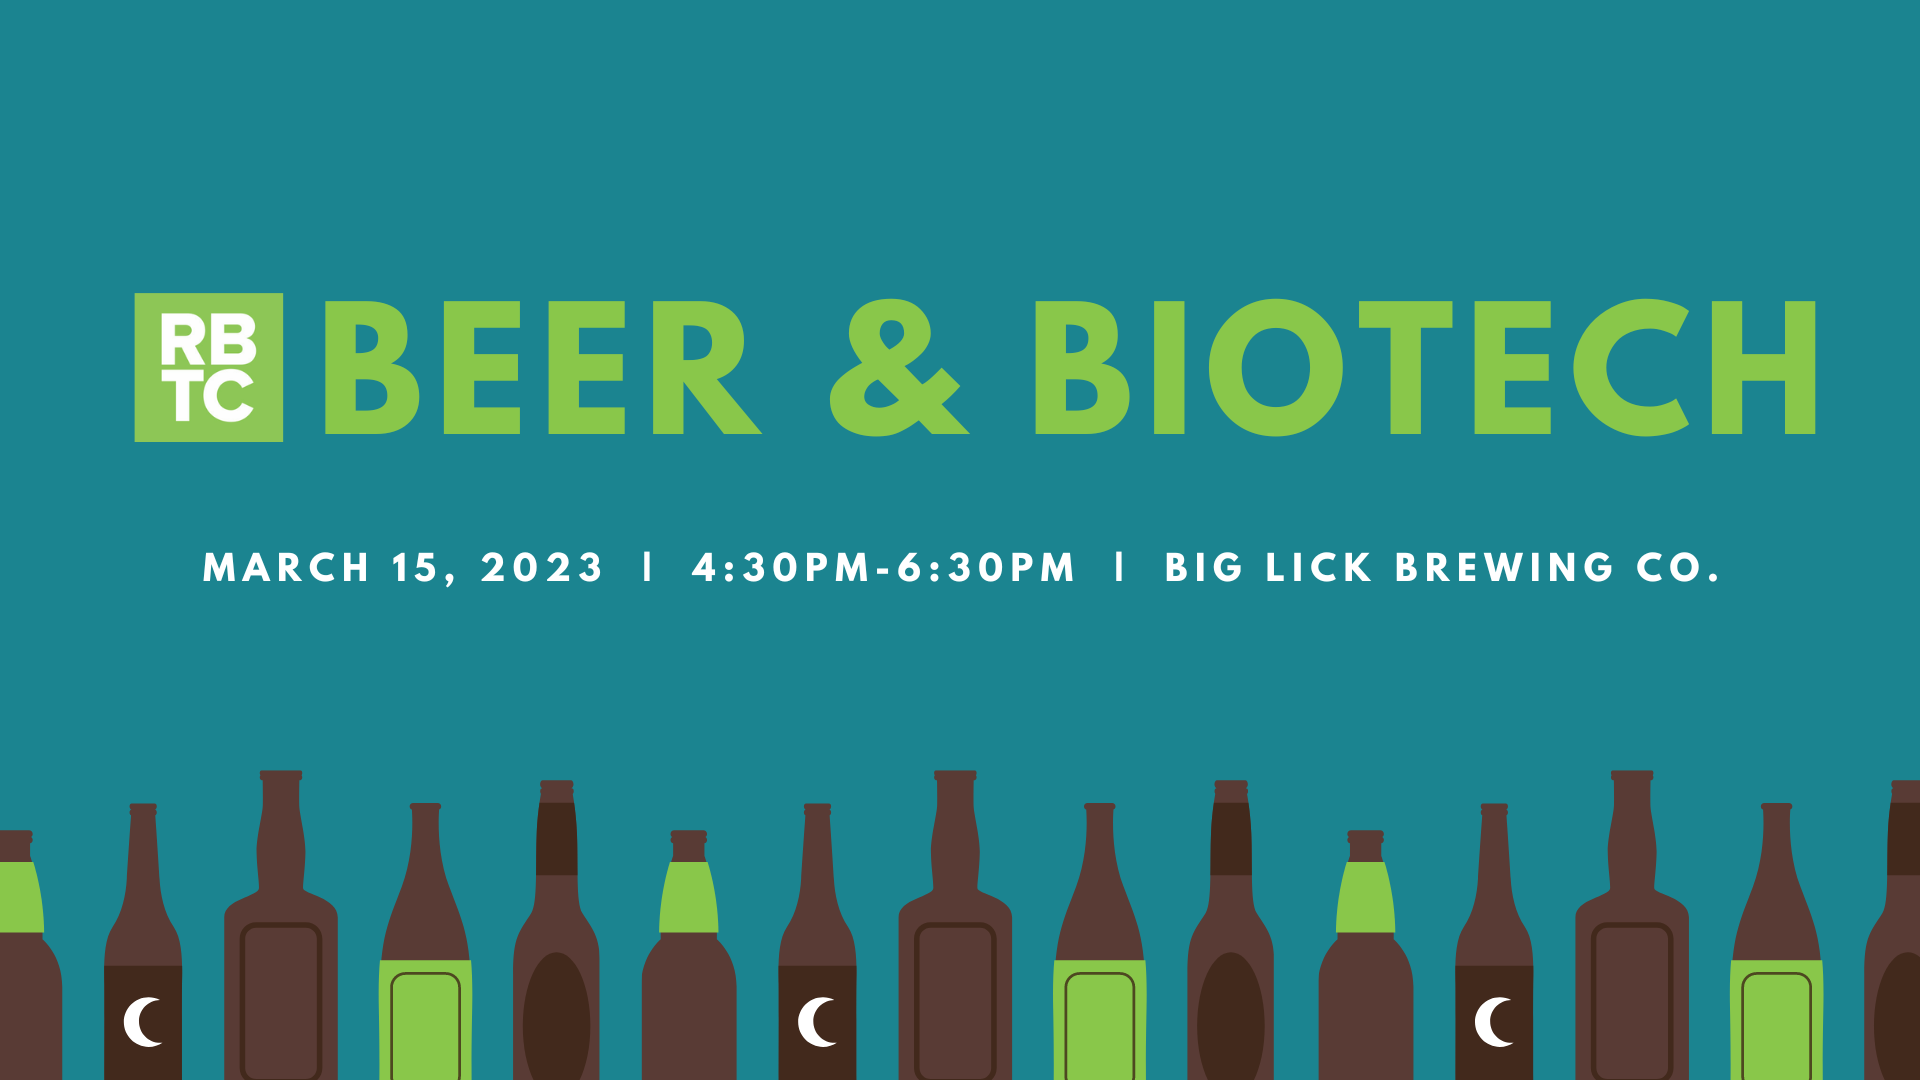 RBTC Beer & Biotech with VT Beam